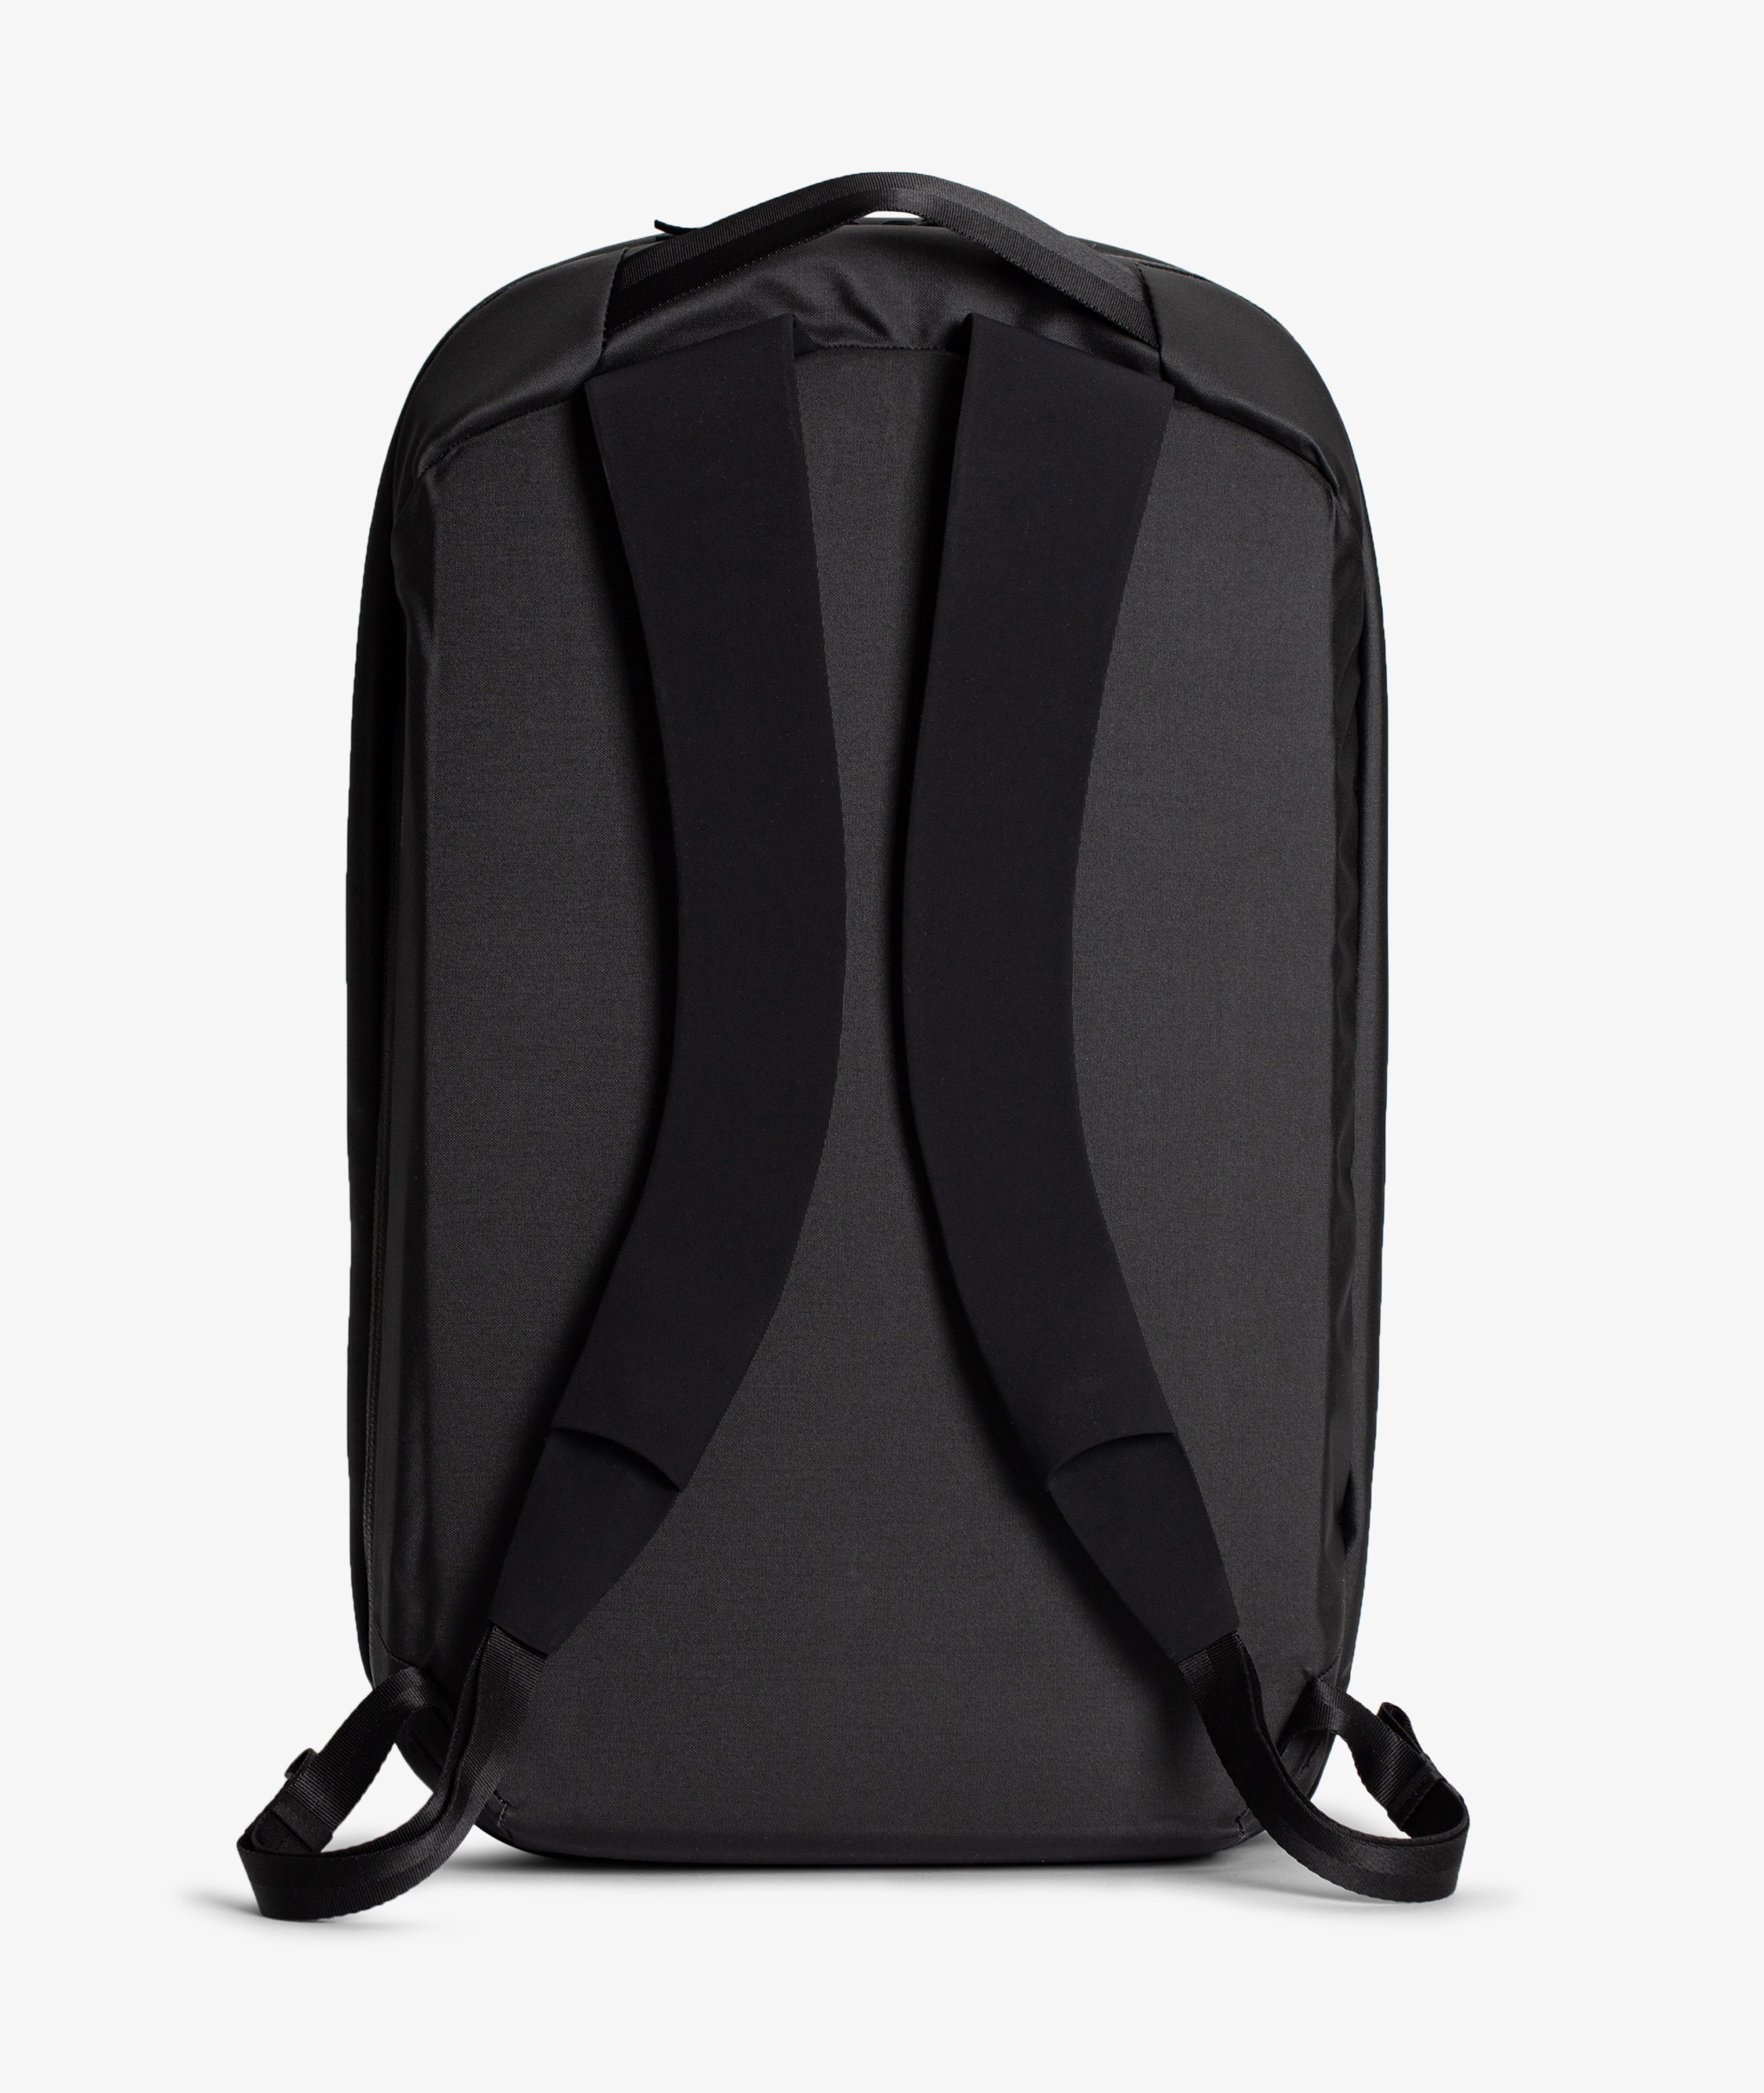 Norse Store | Shipping Worldwide - Veilance Nomin Pack - Black